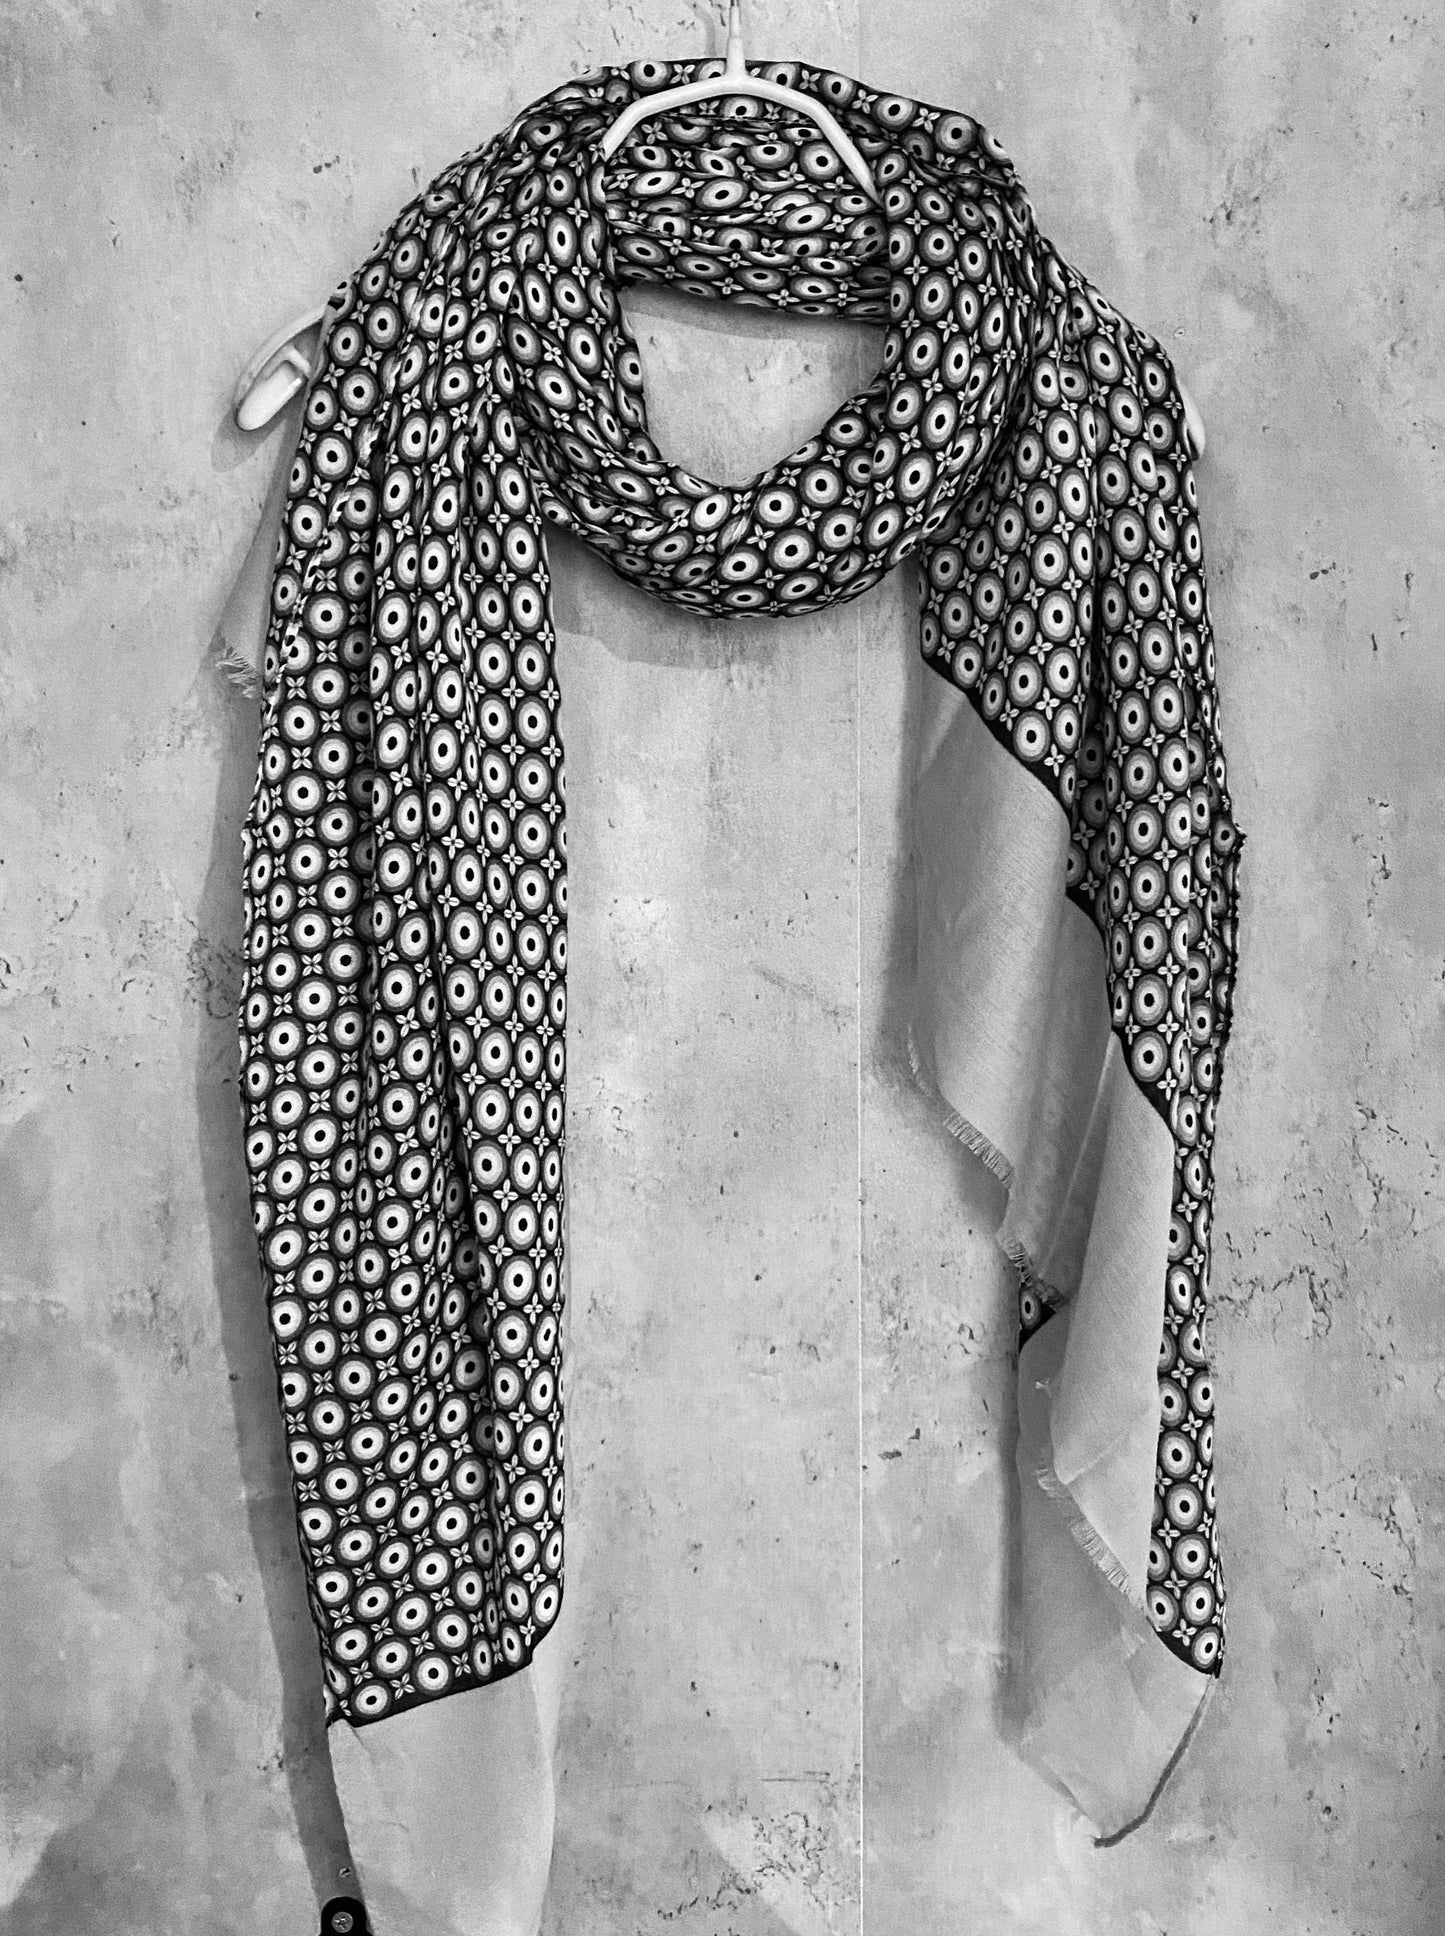 Retro Geo Seamless Dots Pattern Grey Cotton Scarf/Summer Autumn Scarf/Gifts For Mom/Scarf Women/UK Seller/Gifts For Her Birthday Christmas